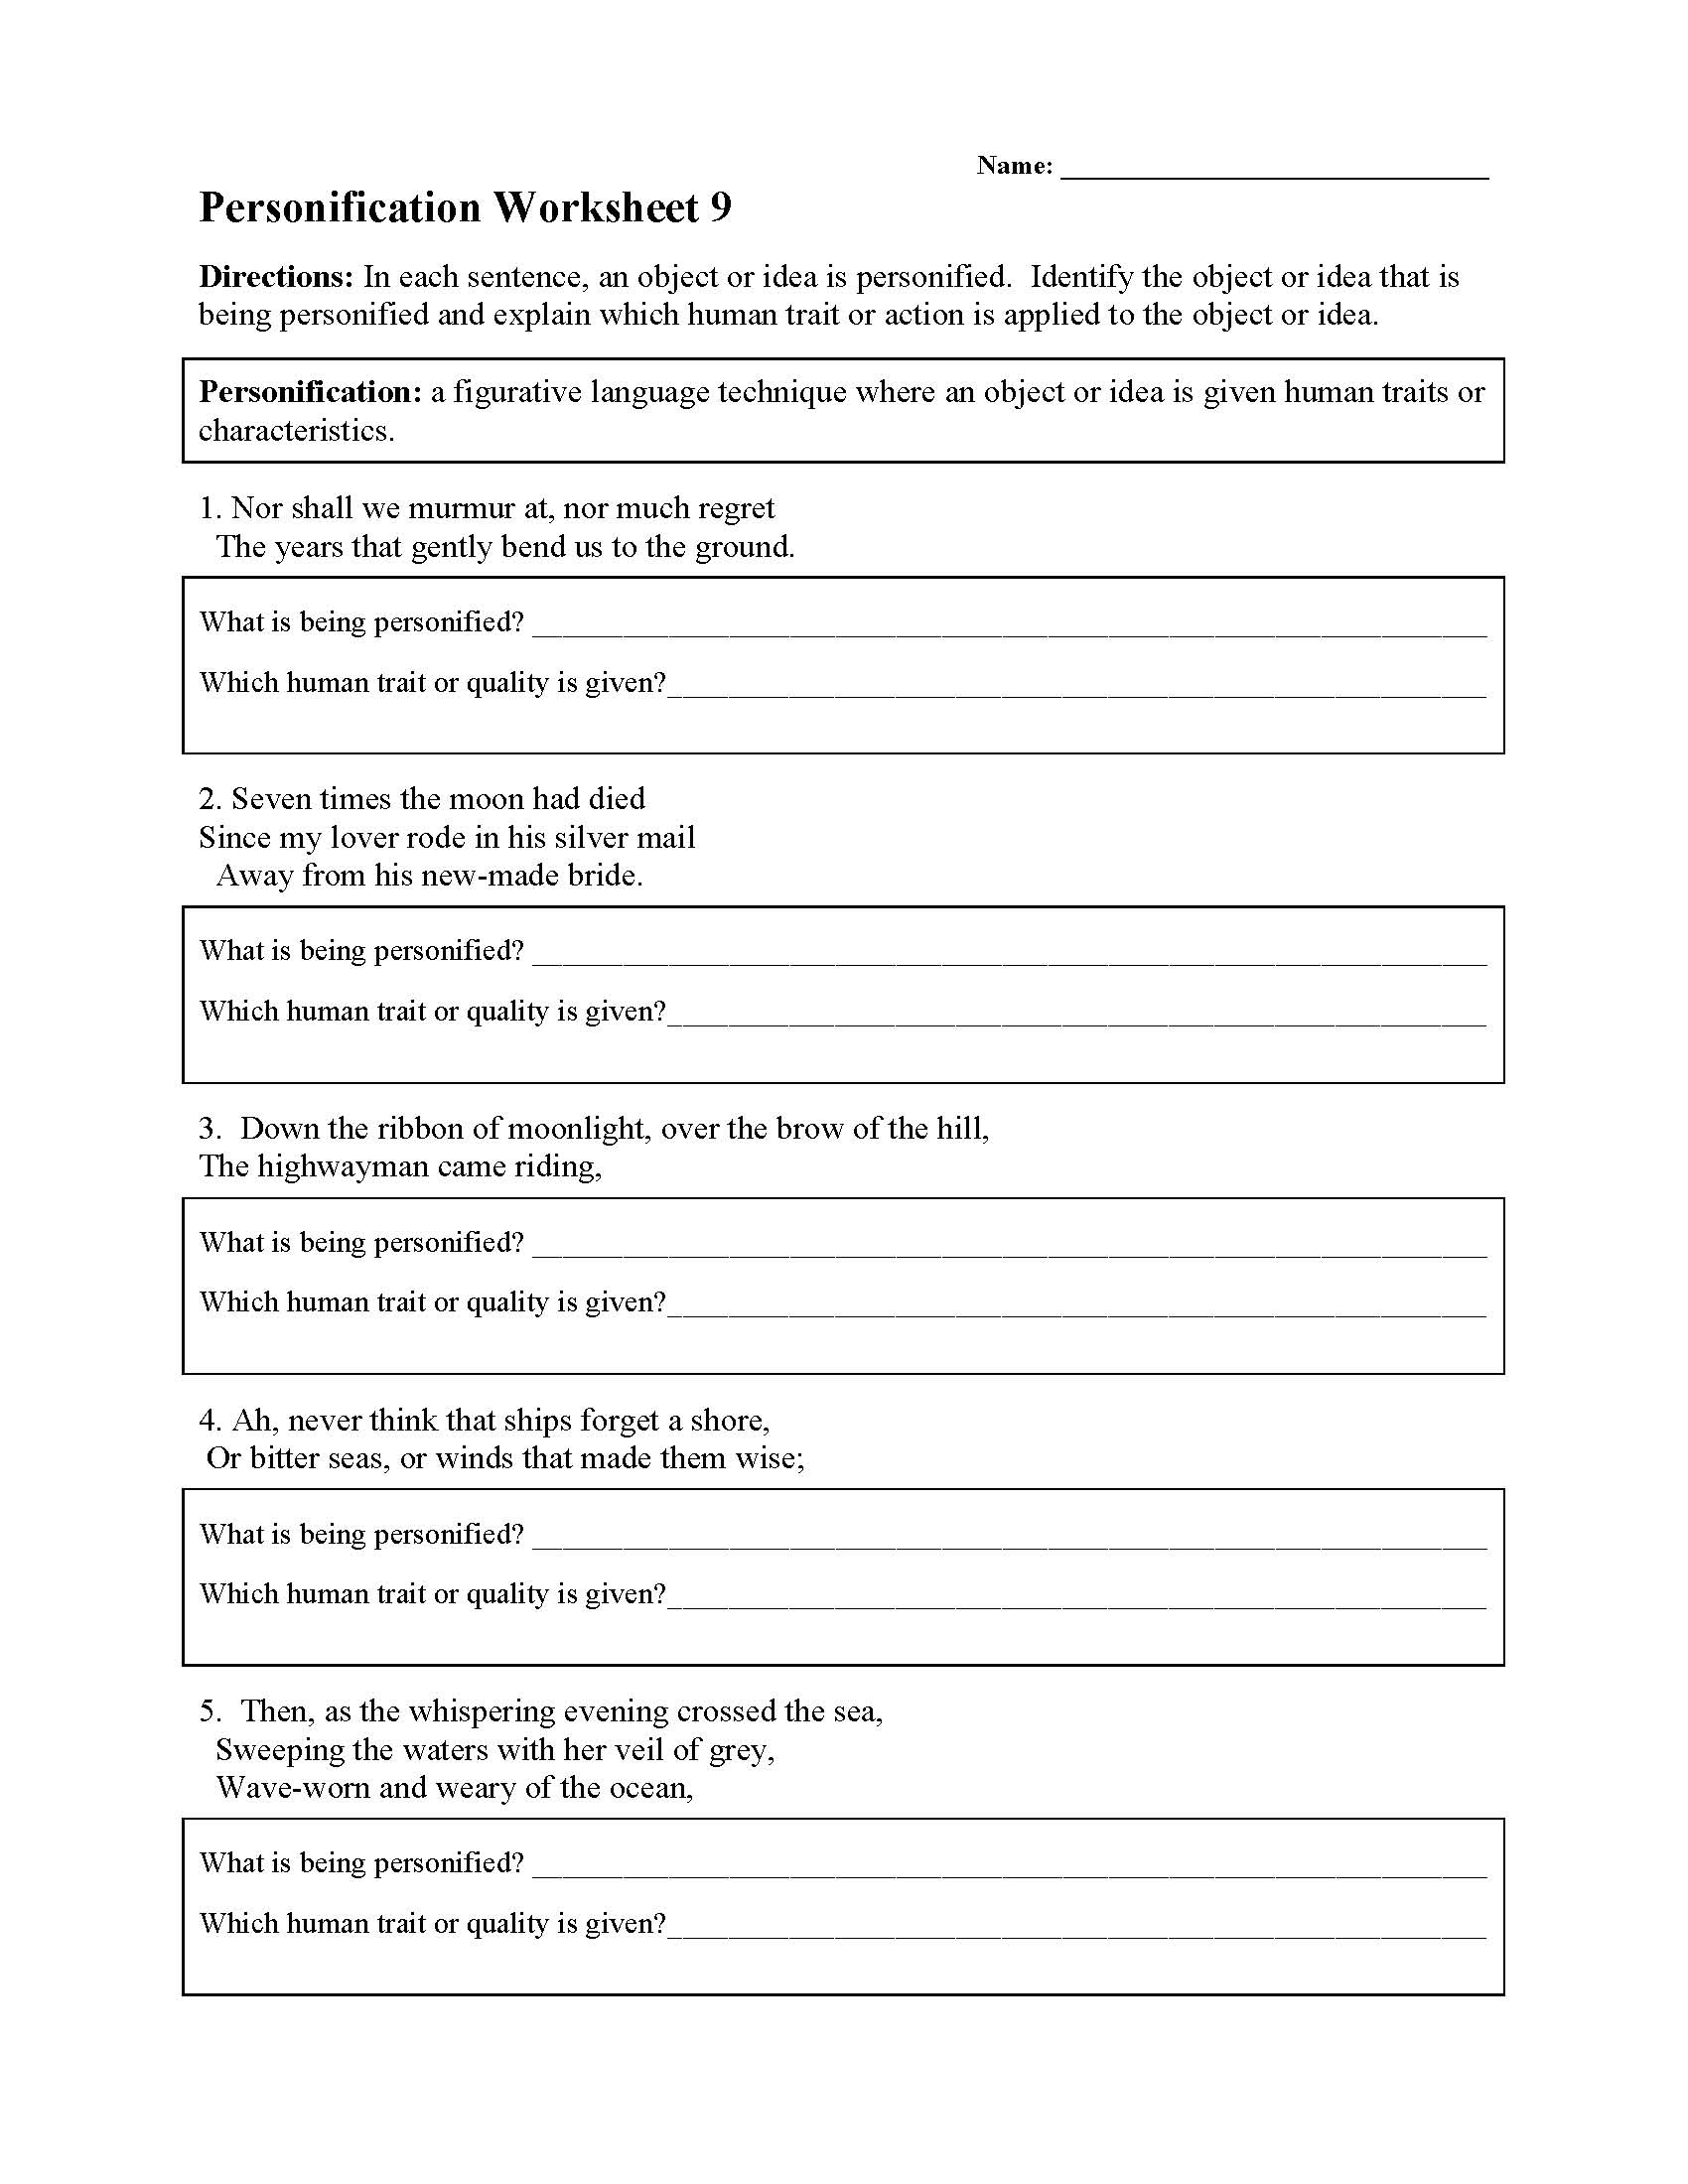 personification-3rd-grade-worksheet